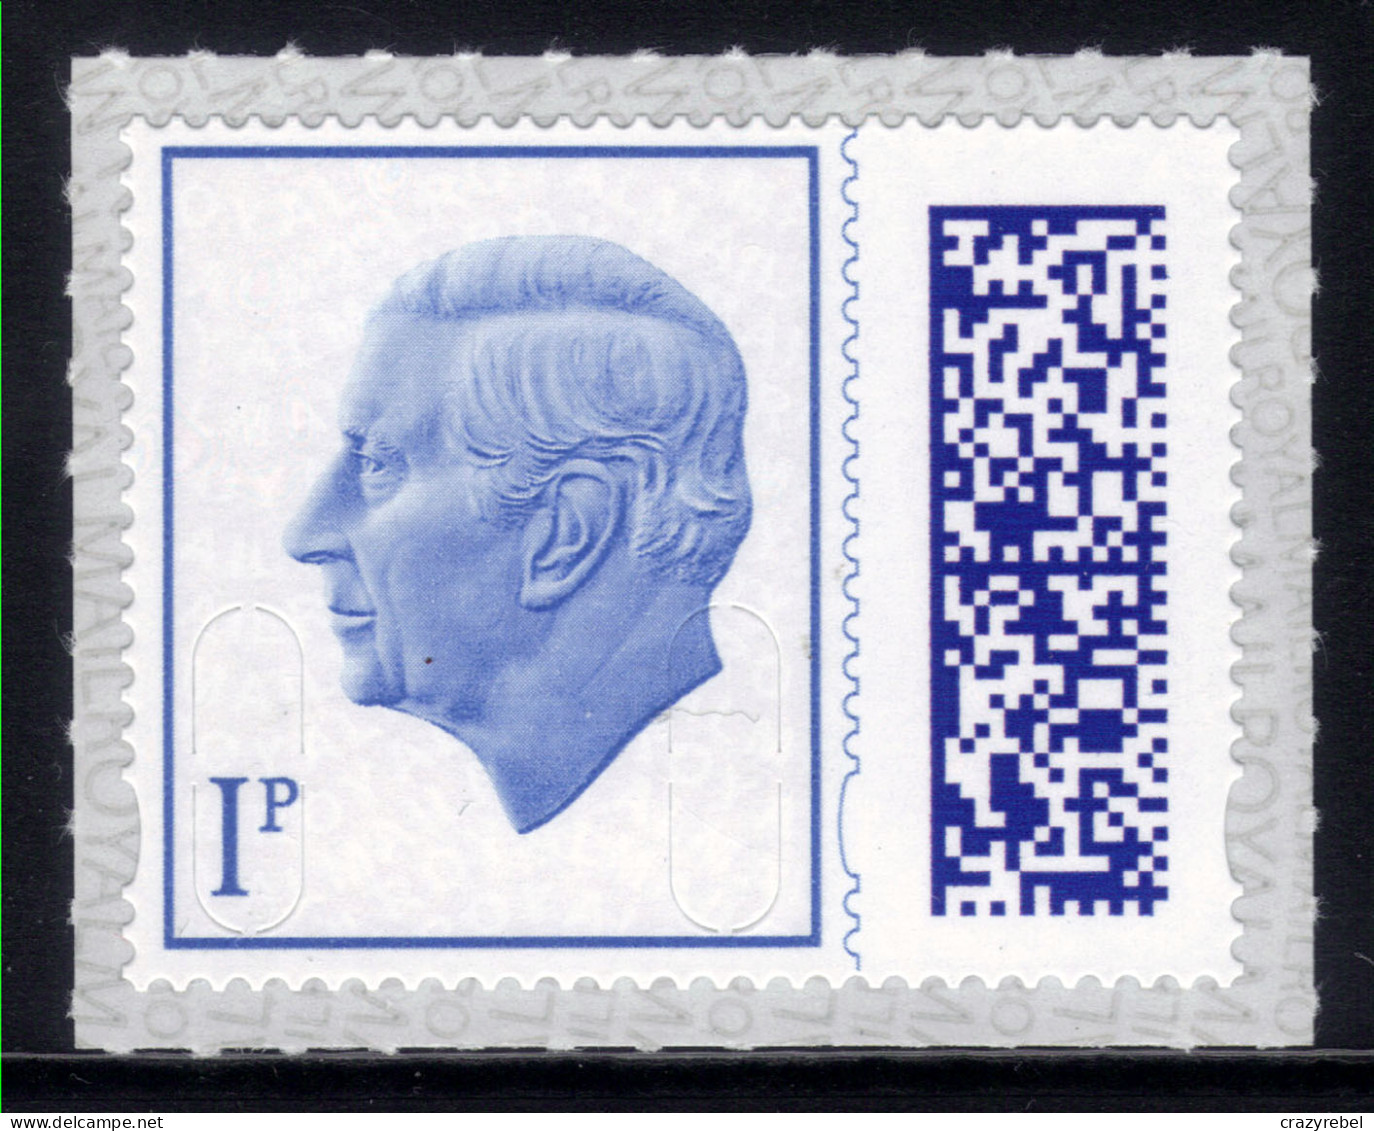 GB 2023 KC 3rd 1p Blue Barcoded Machin Umm MAIL ( M521 ) - Unused Stamps